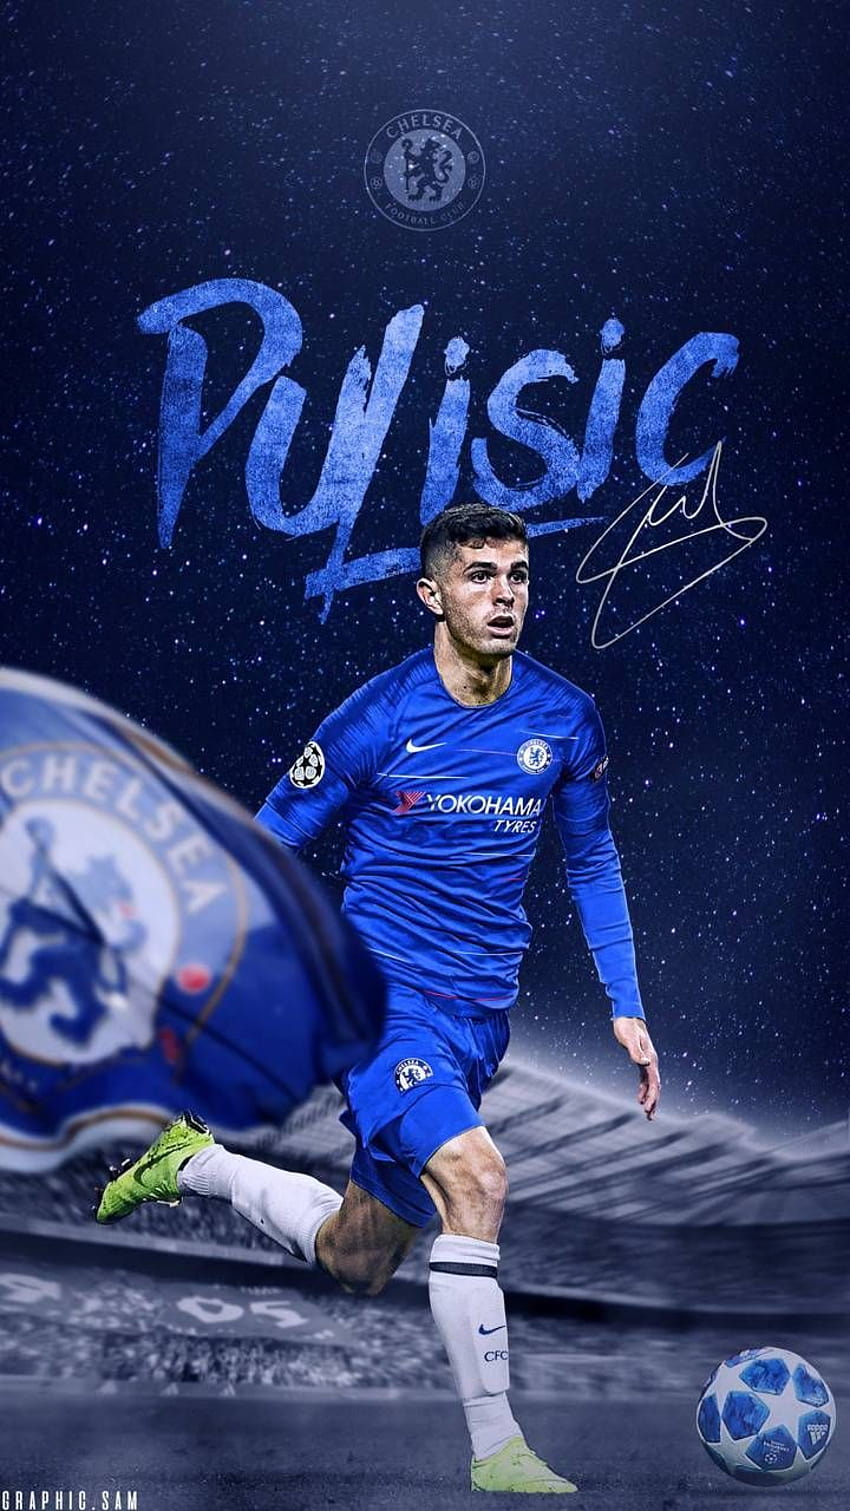 Christian Pulisic for mobile phone, tablet, computer and other devices … in 2020, christian pulisic chelsea HD phone wallpaper